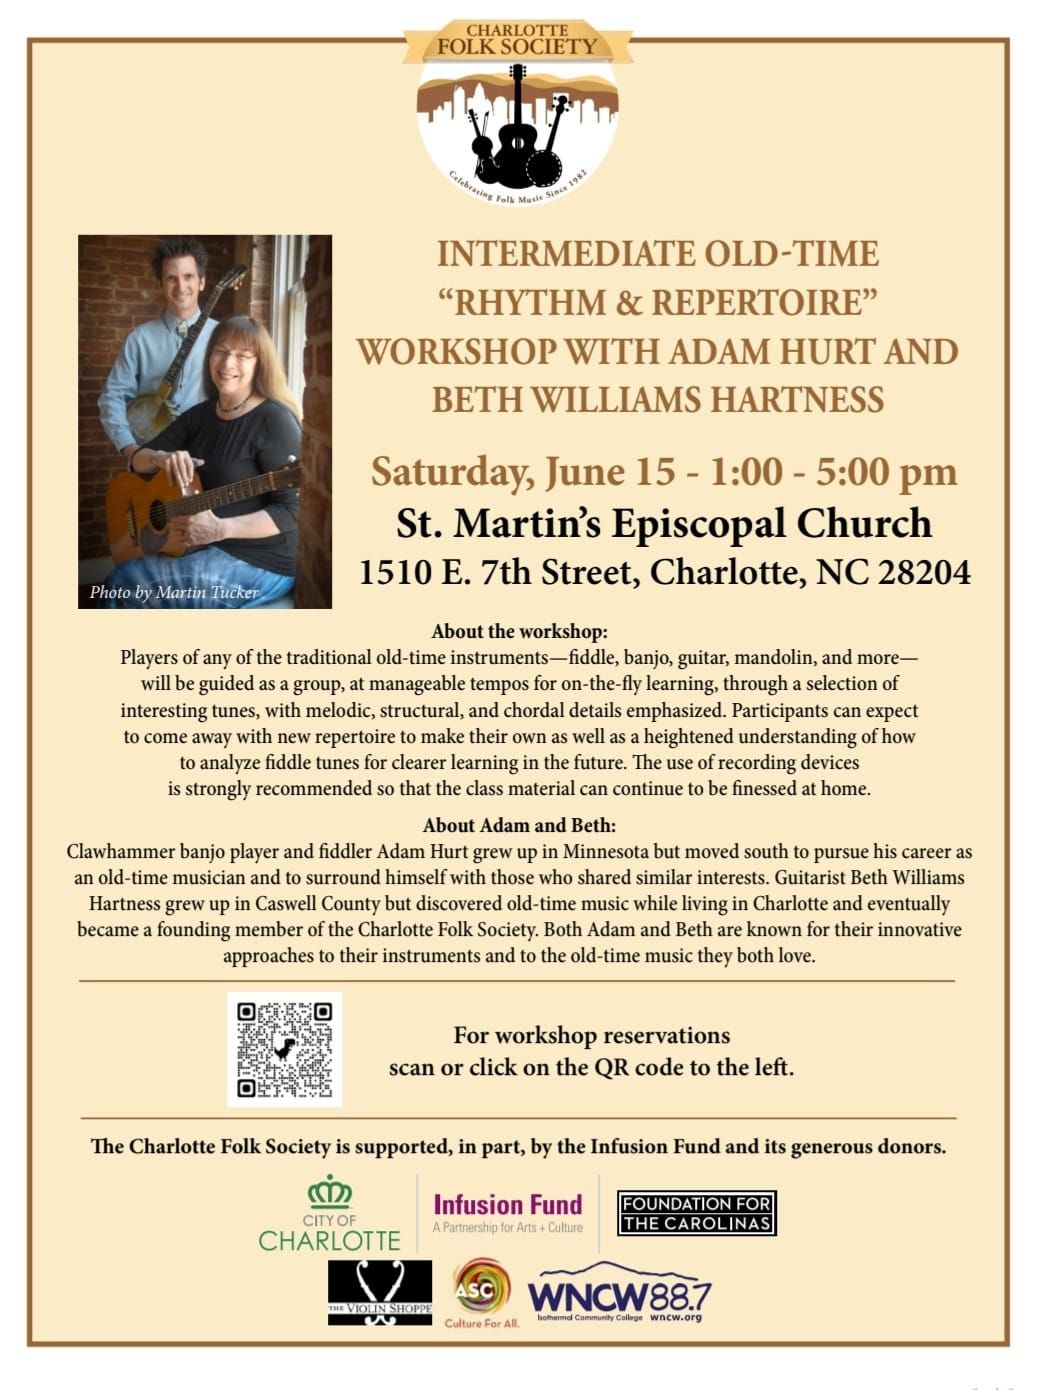 Old Time Rhythm and Repertoire Workshop with Adam Hurt and Beth Hartness